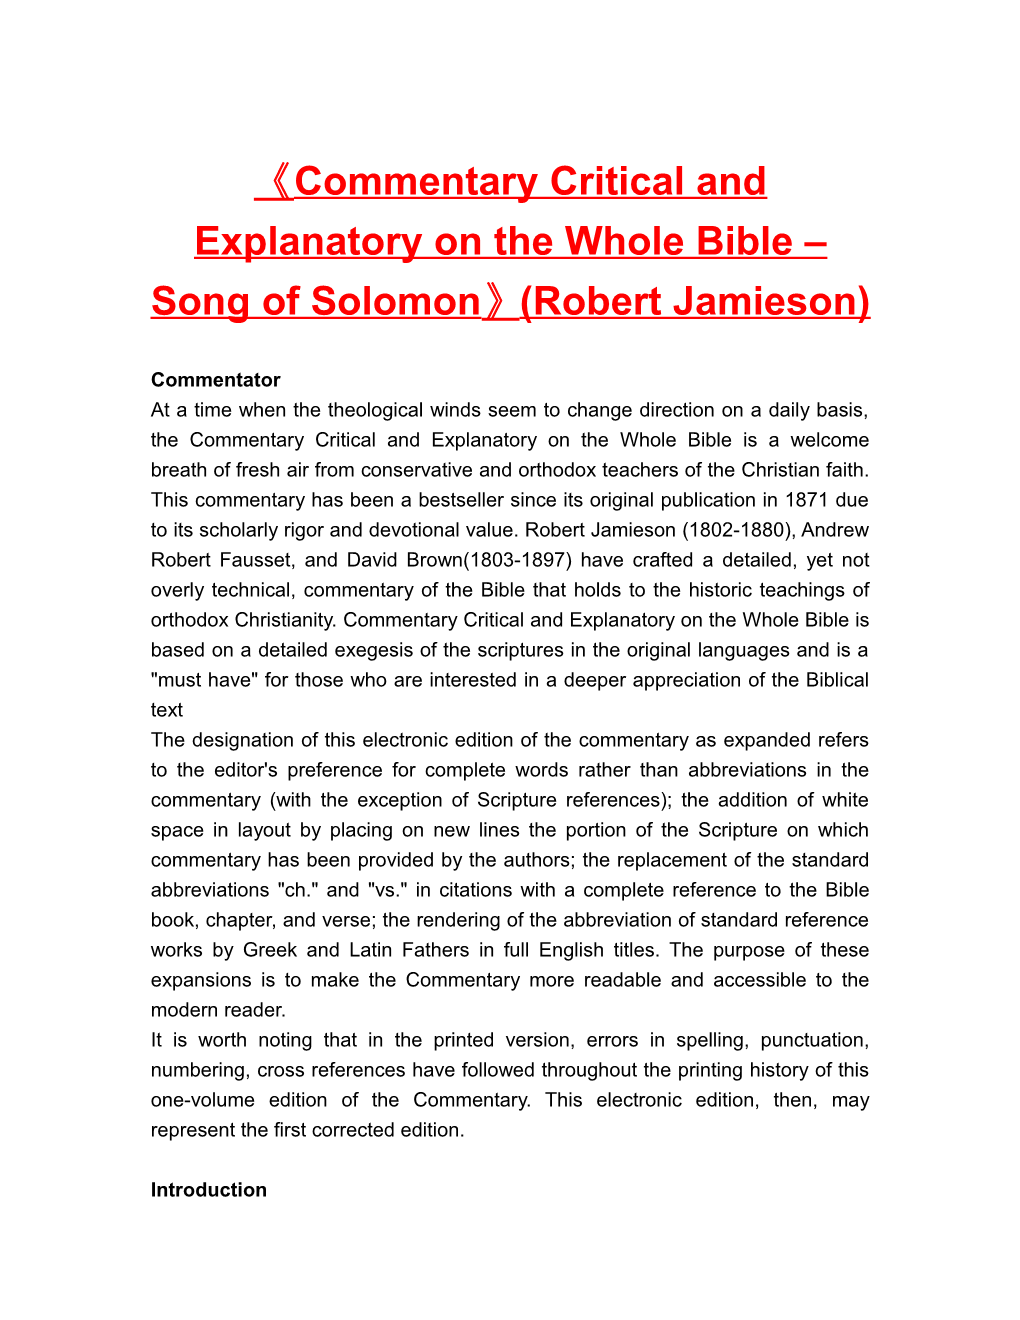 Commentary Critical and Explanatory on the Whole Bible Song of Solomon (Robert Jamieson)